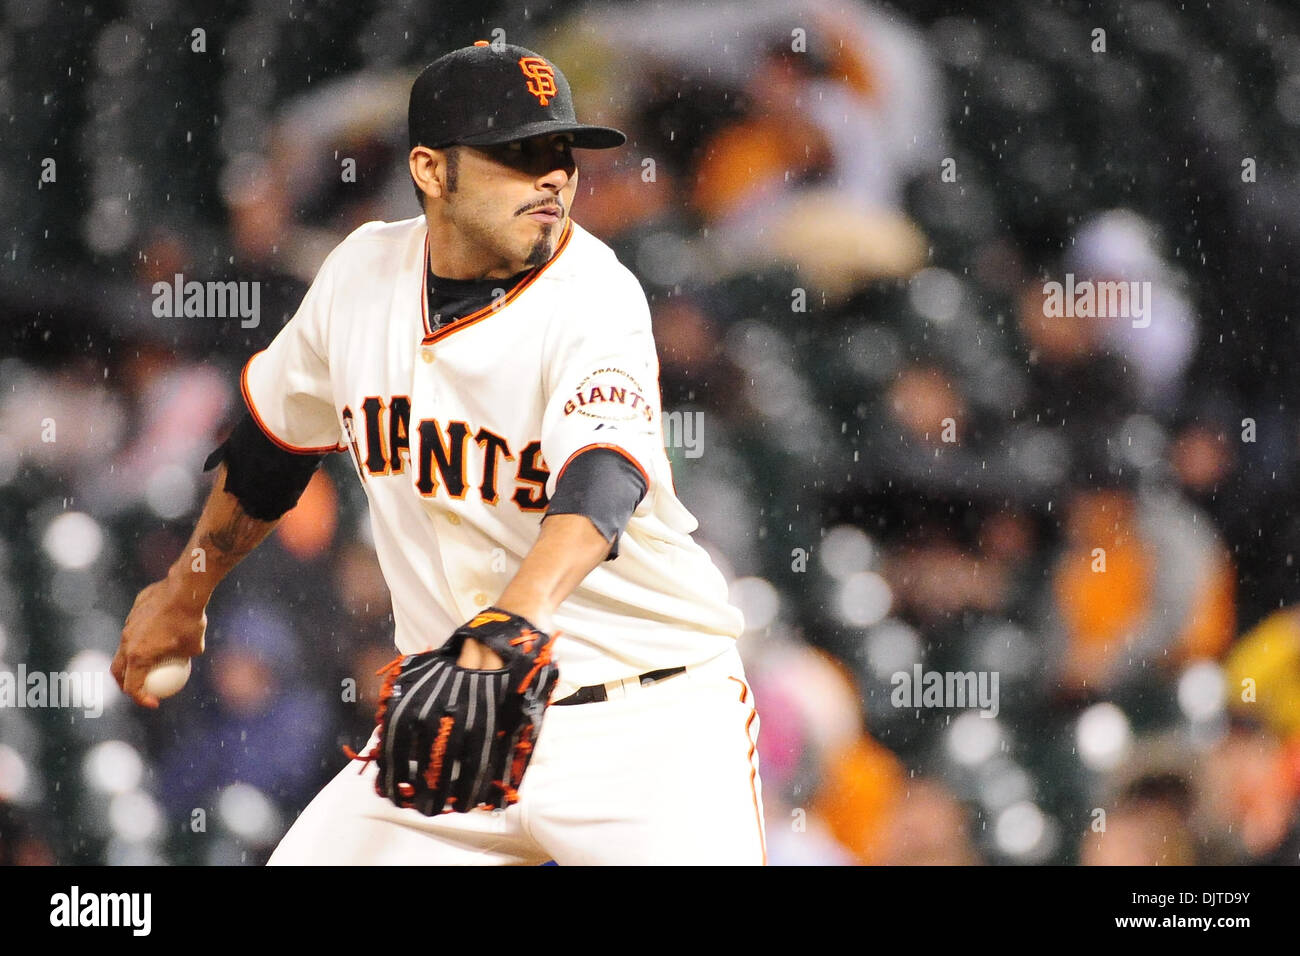 San Francisco, CA: San Francisco Giants pitcher Sergio Romo (54) pitches as  rain falls at AT&T park during the game against the Washington Nationals.  The Giants won the game 4-2. (Credit Image: ©